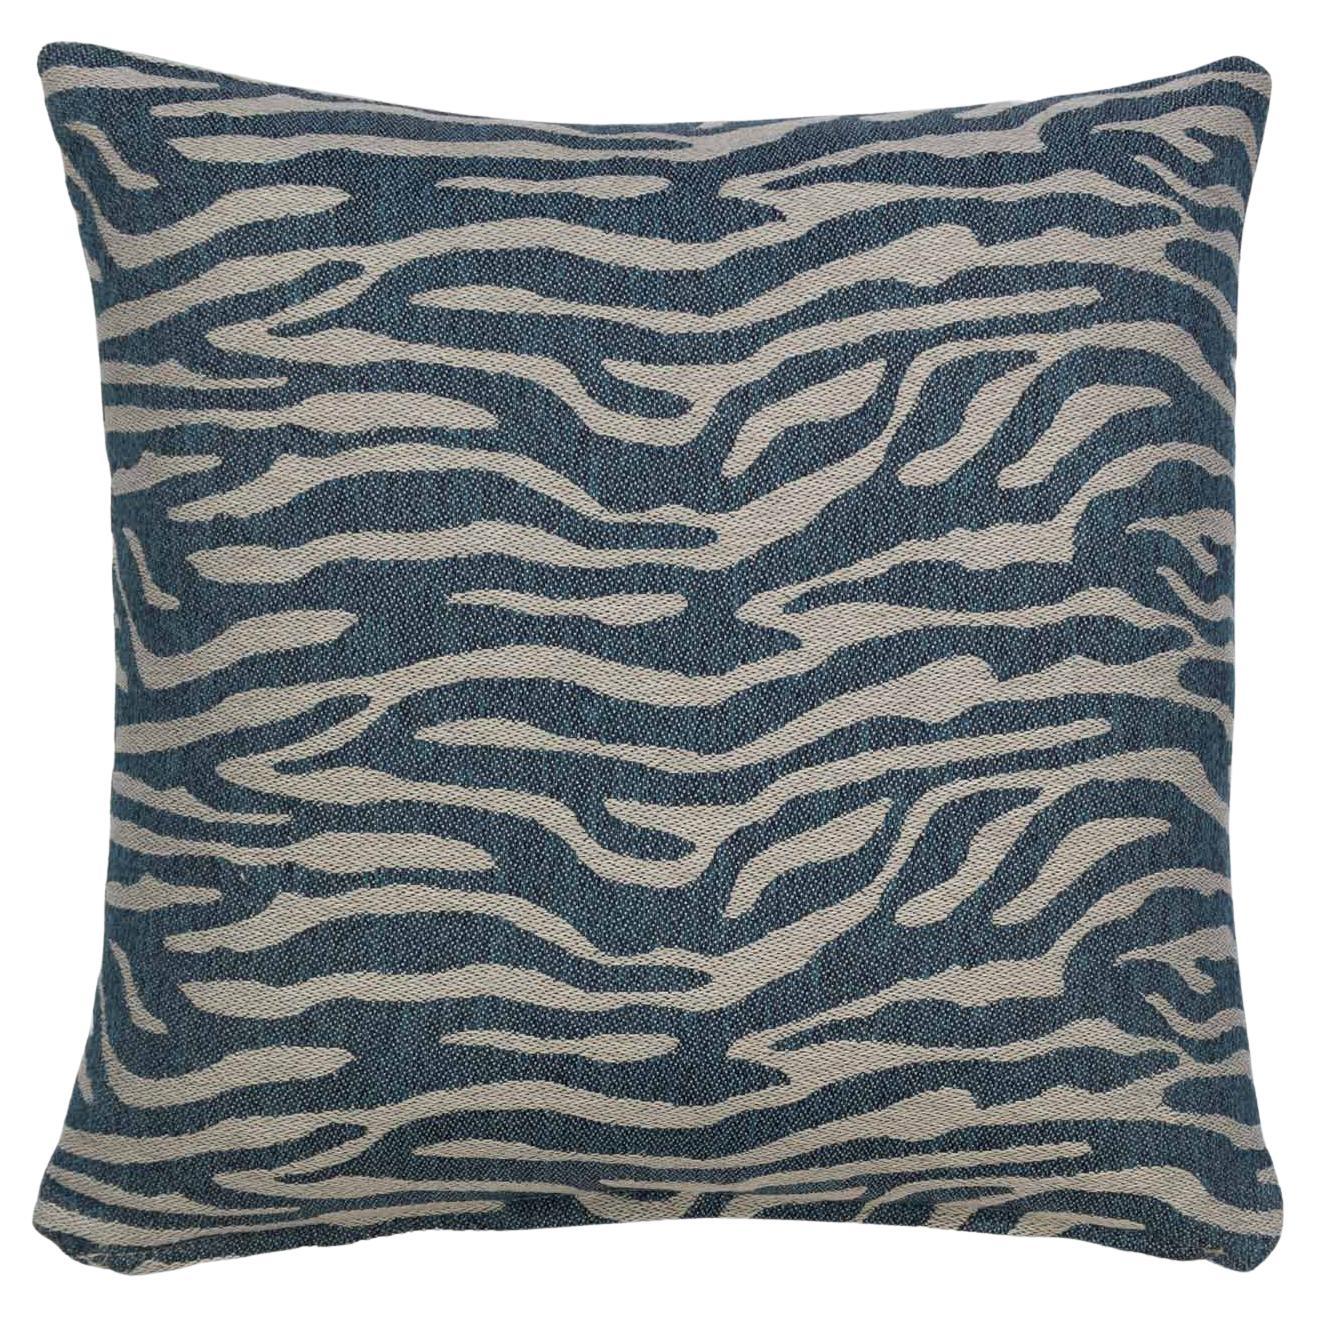 Modern Textured Patterned Throw Pillow Blue "Cayenne" by Evolution21 For Sale